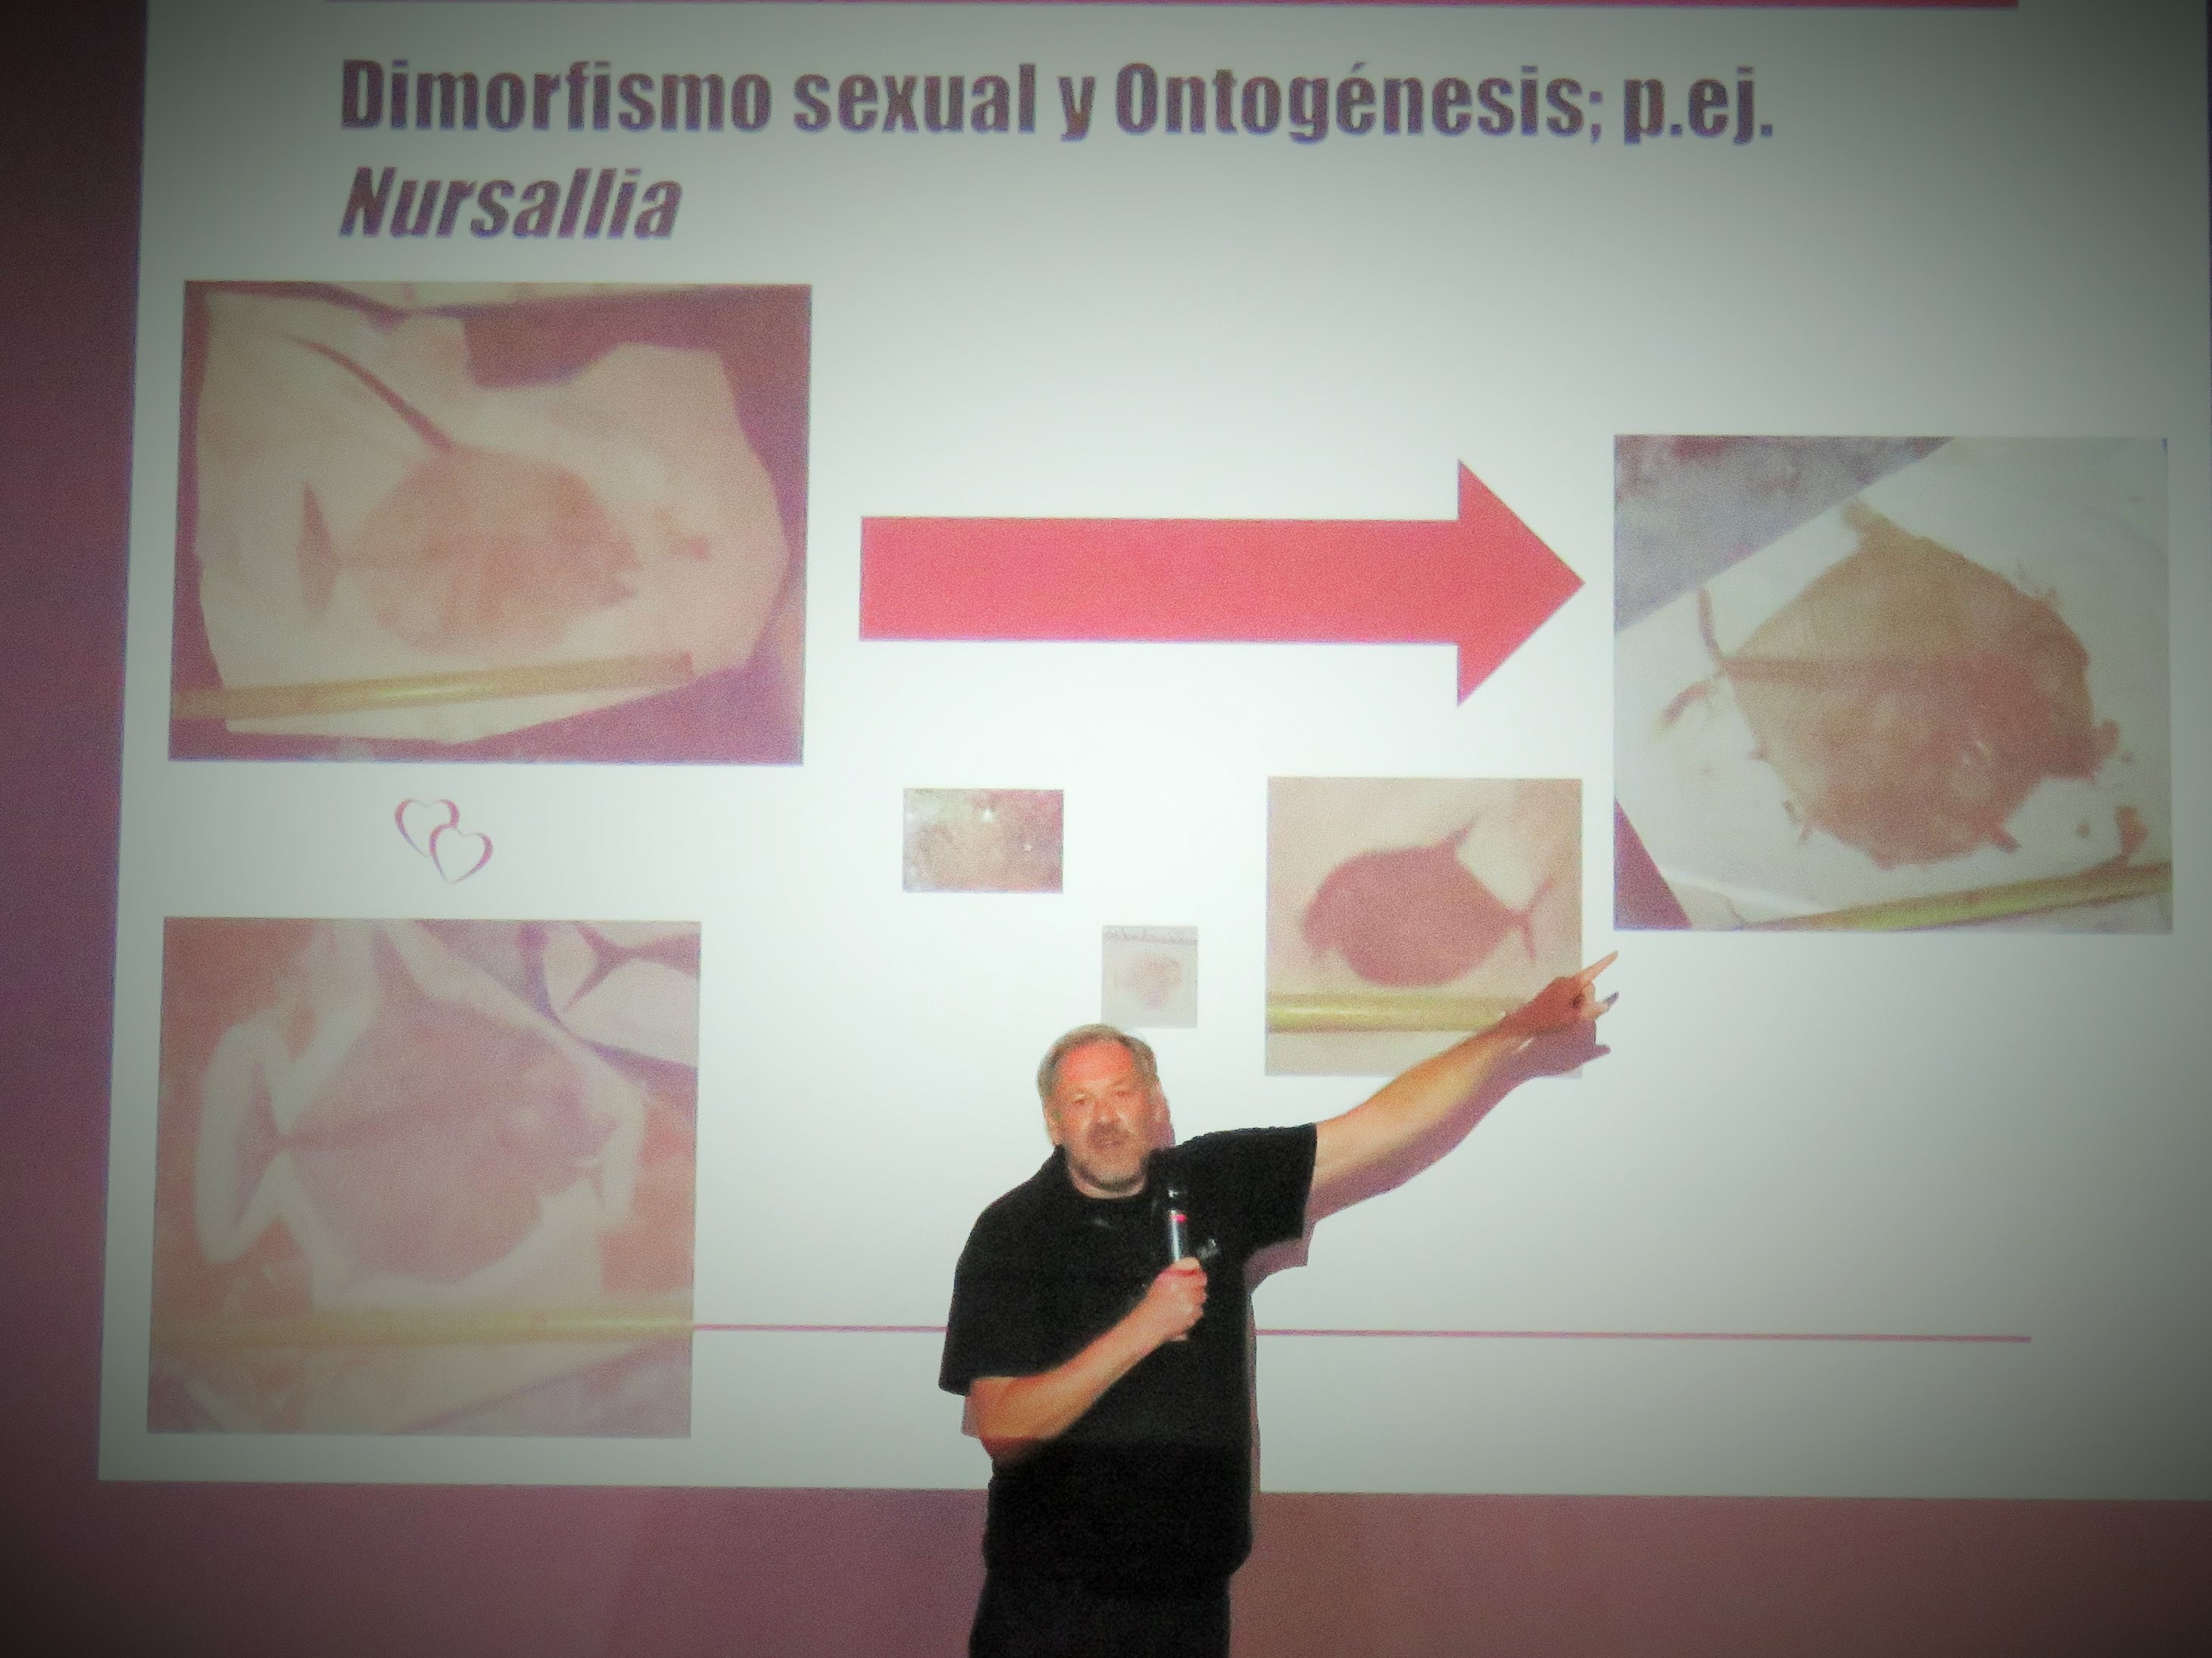 Wolfgang Stinnesbeck presents his palaeontological work with fossils